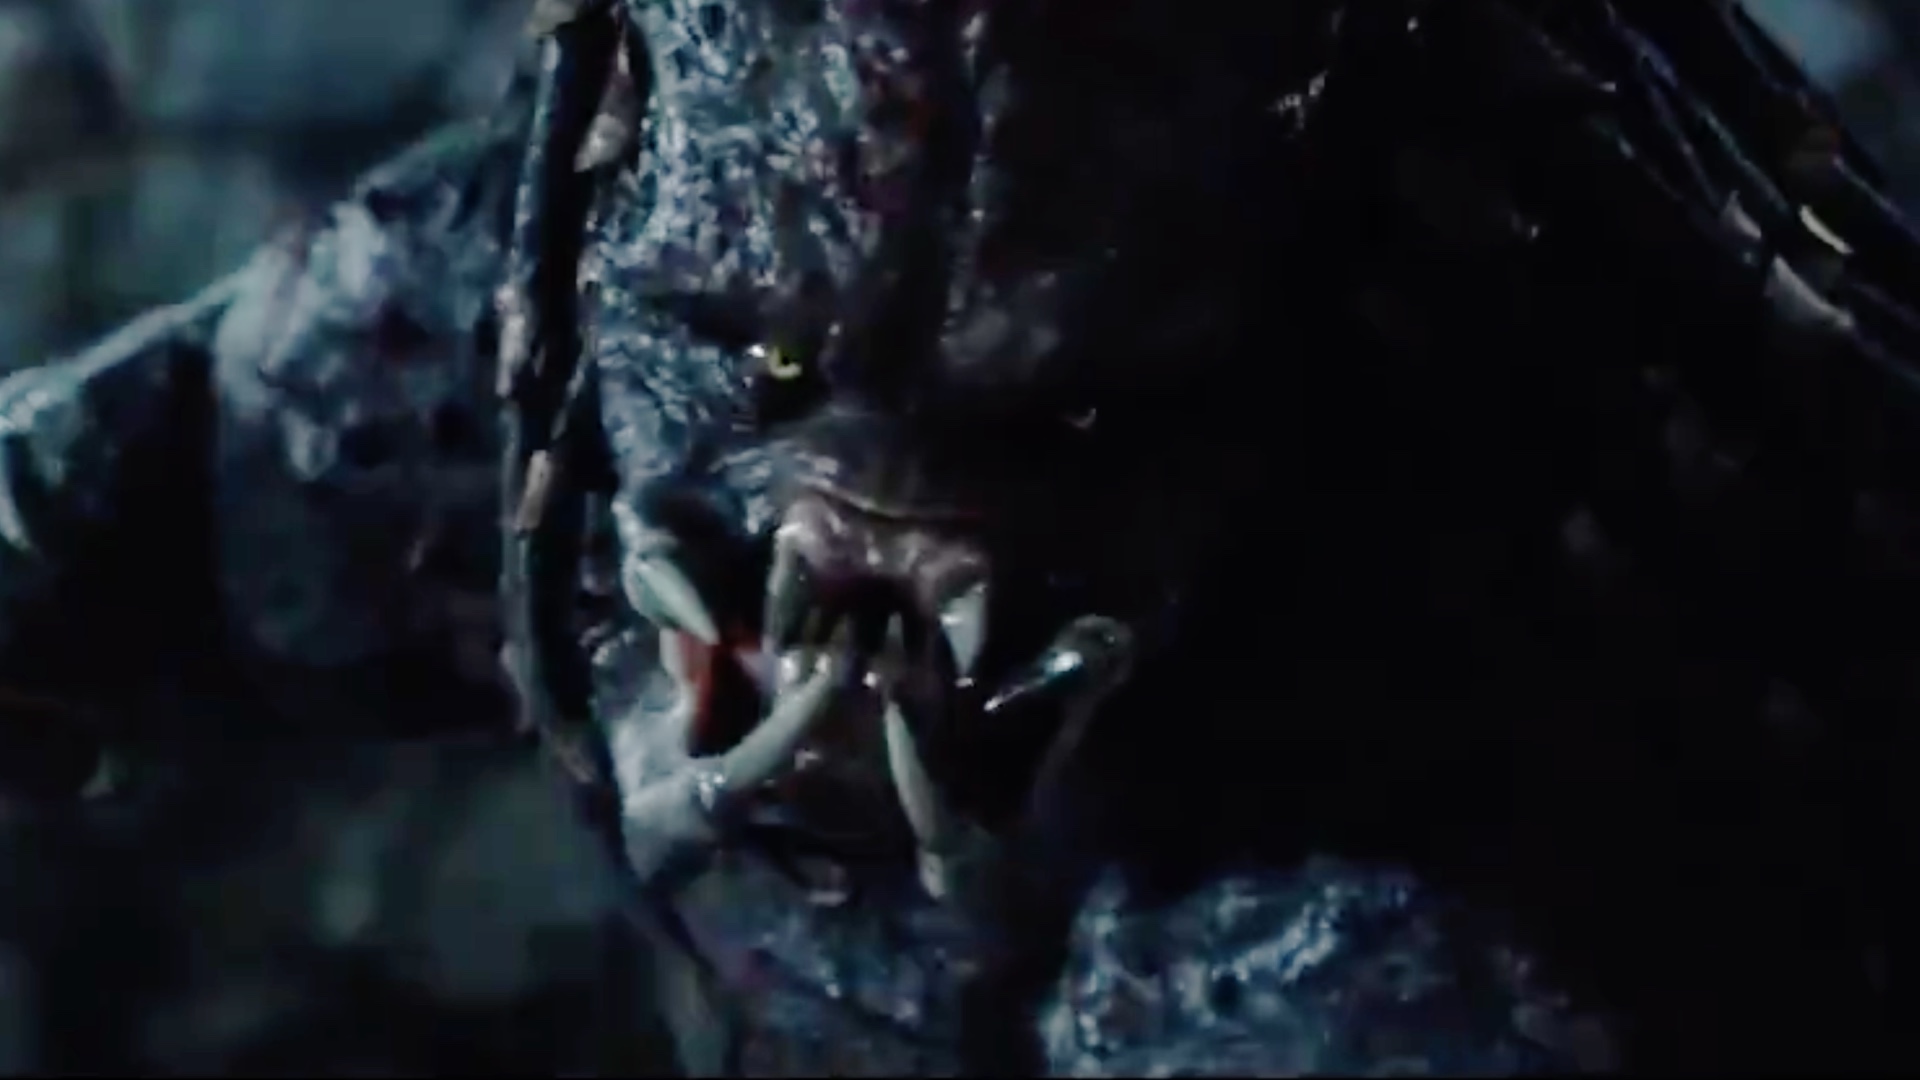 The Ultimate Predator Looks Pissed In This New Promo Spot For